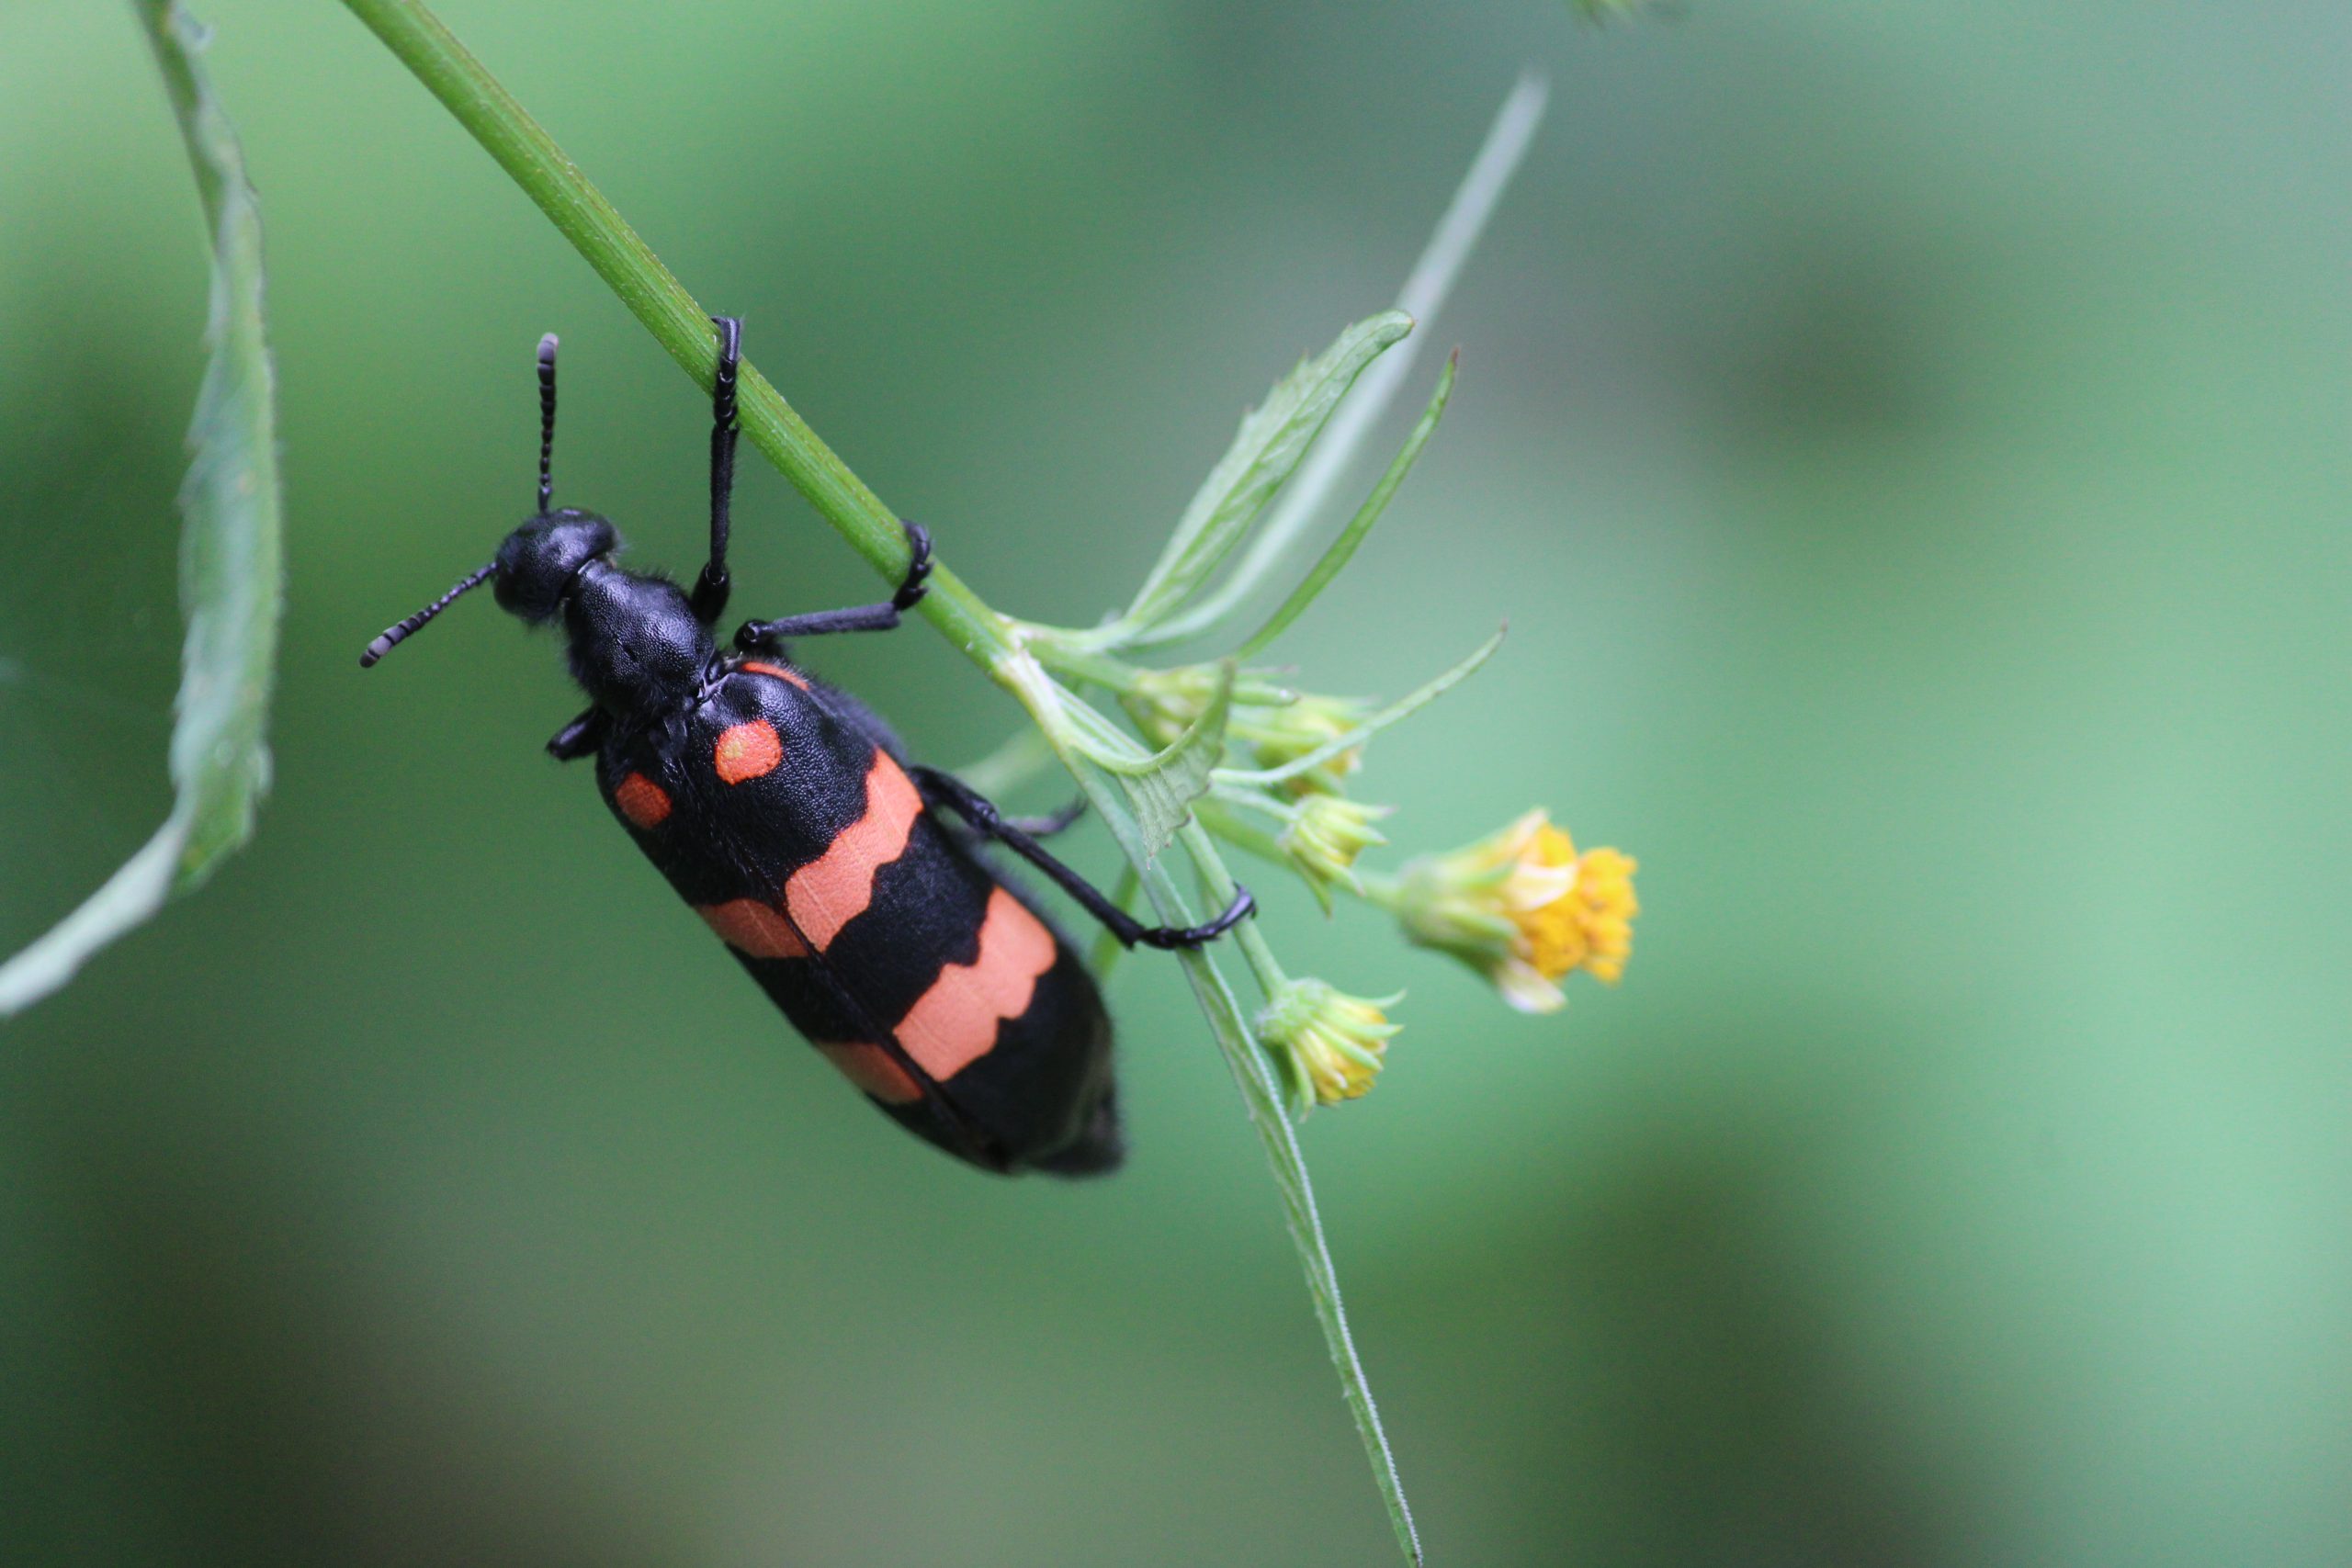 Blister beetle on a plant